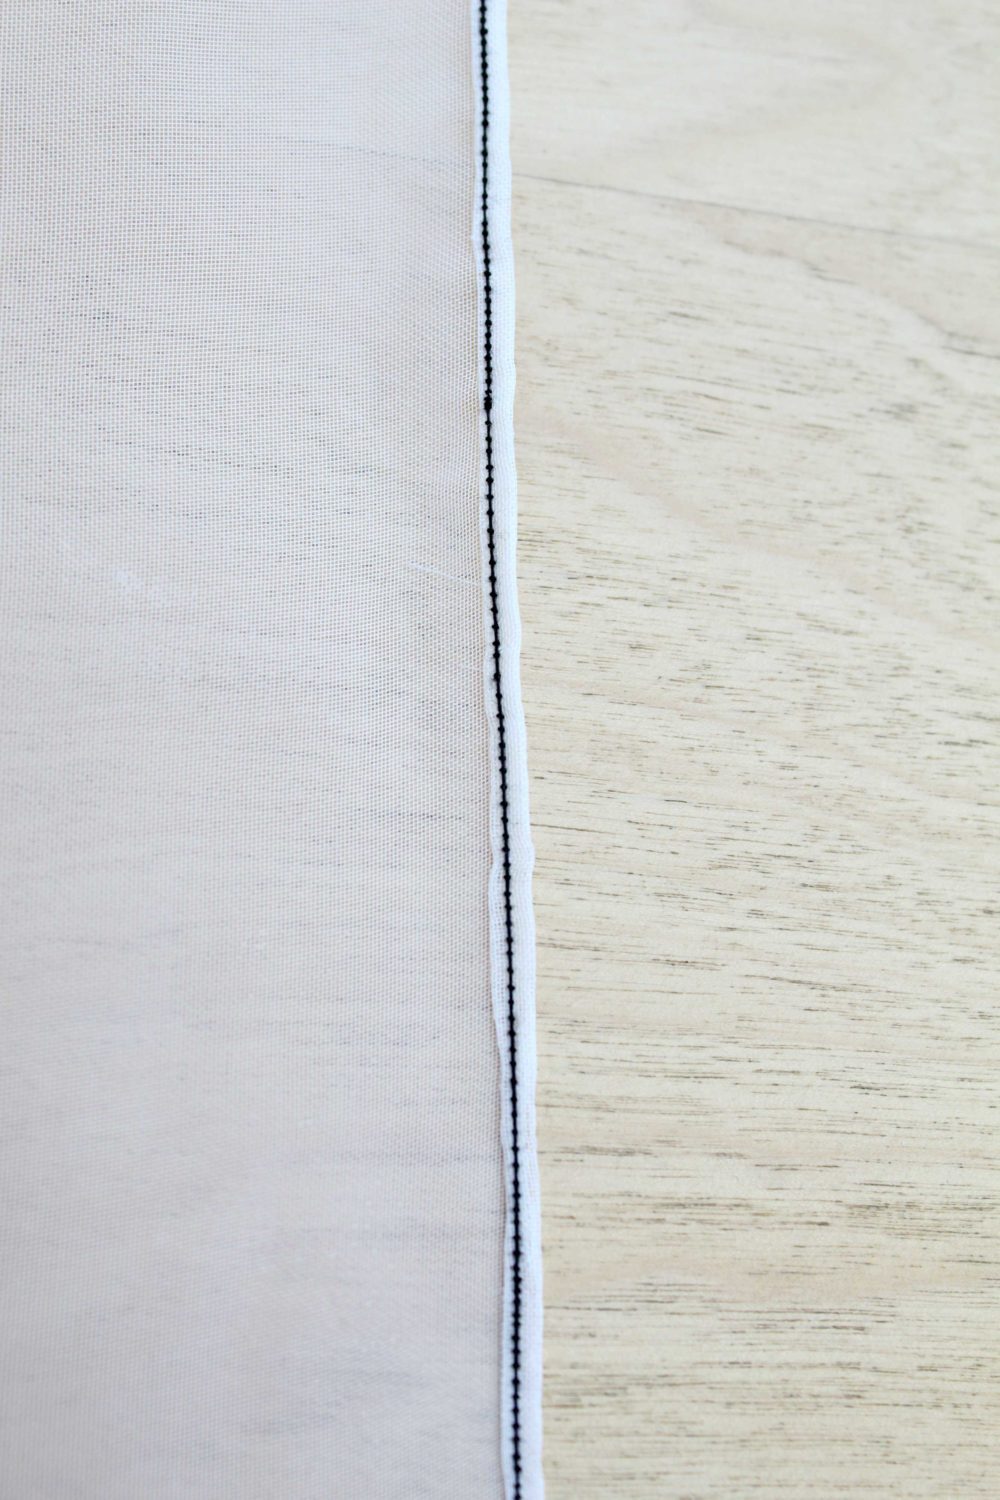 sewing a rolled hem